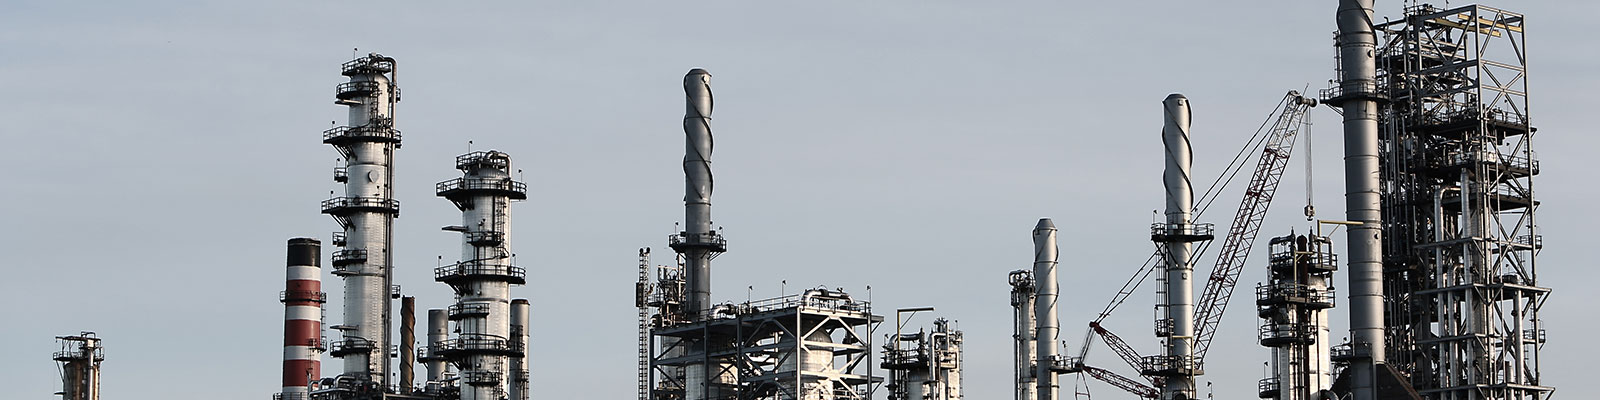 5-dirty-industry-stack-factory-banner